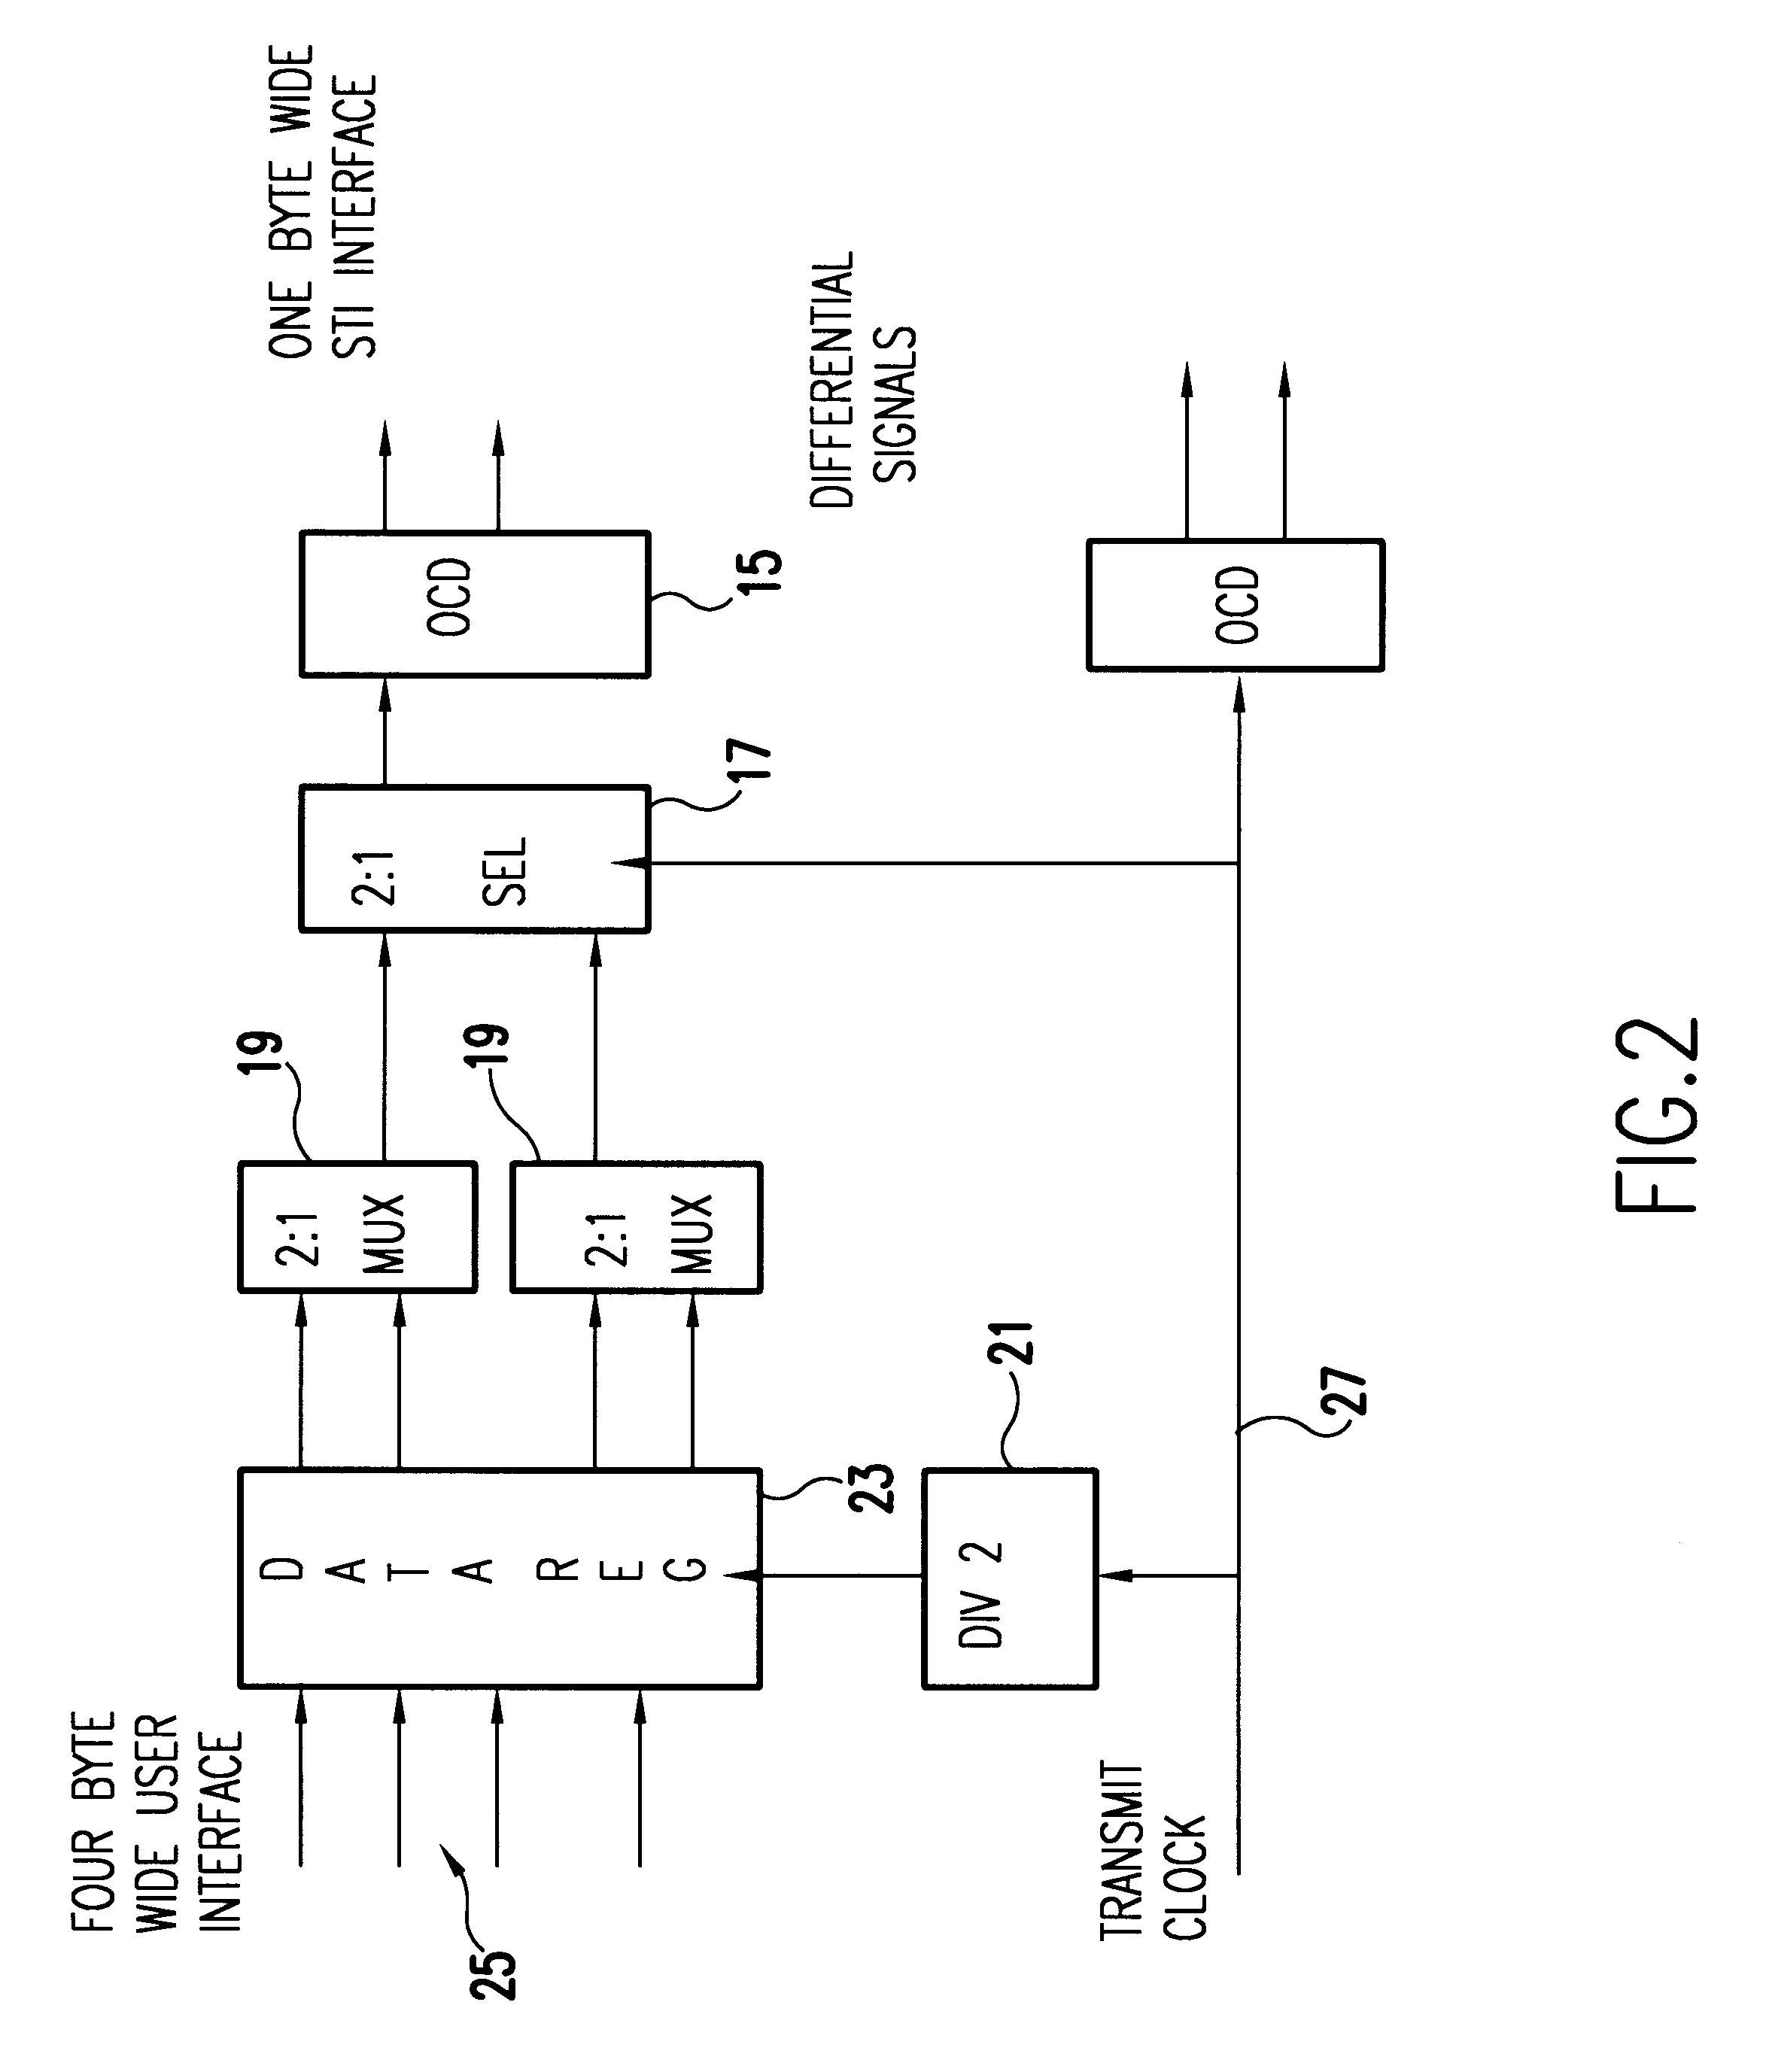 Synchronous interface for transmitting data in a system of massively parallel processors